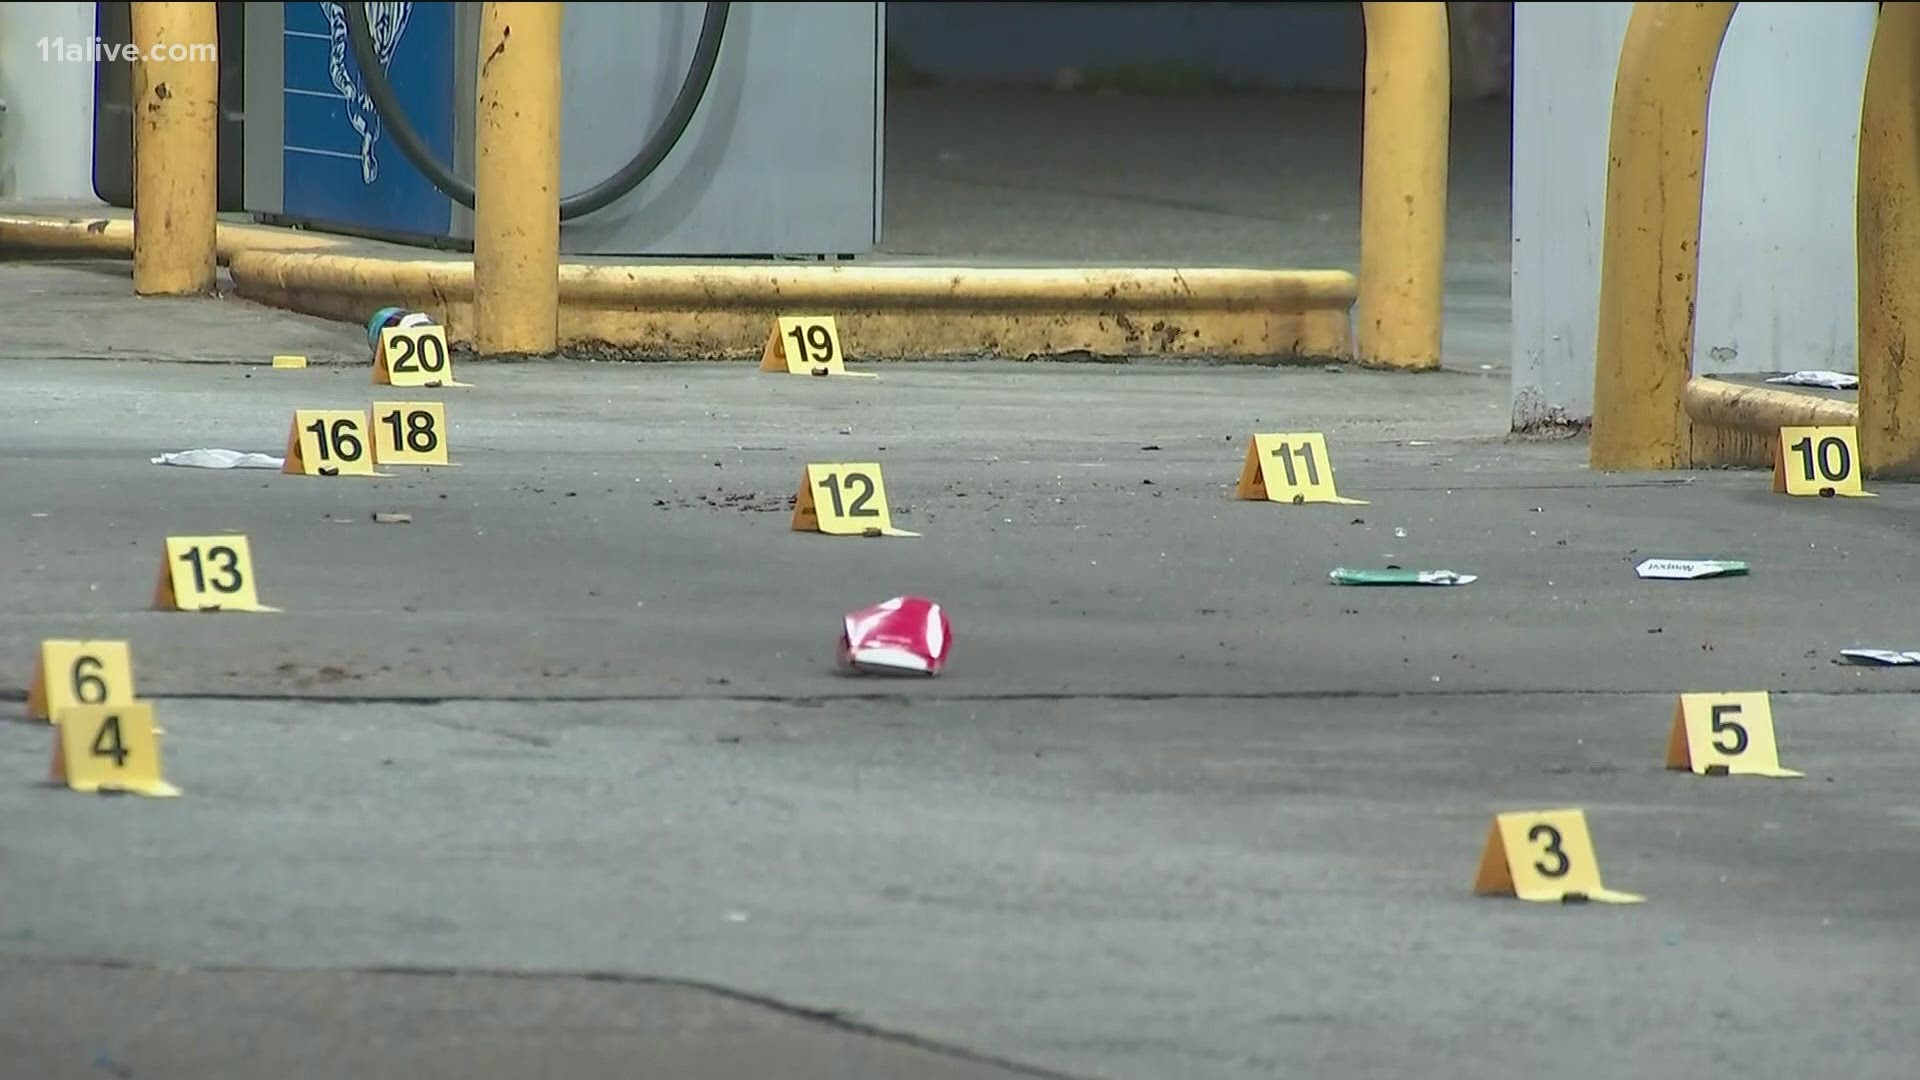 Dozens of rounds were fired during the shooting.